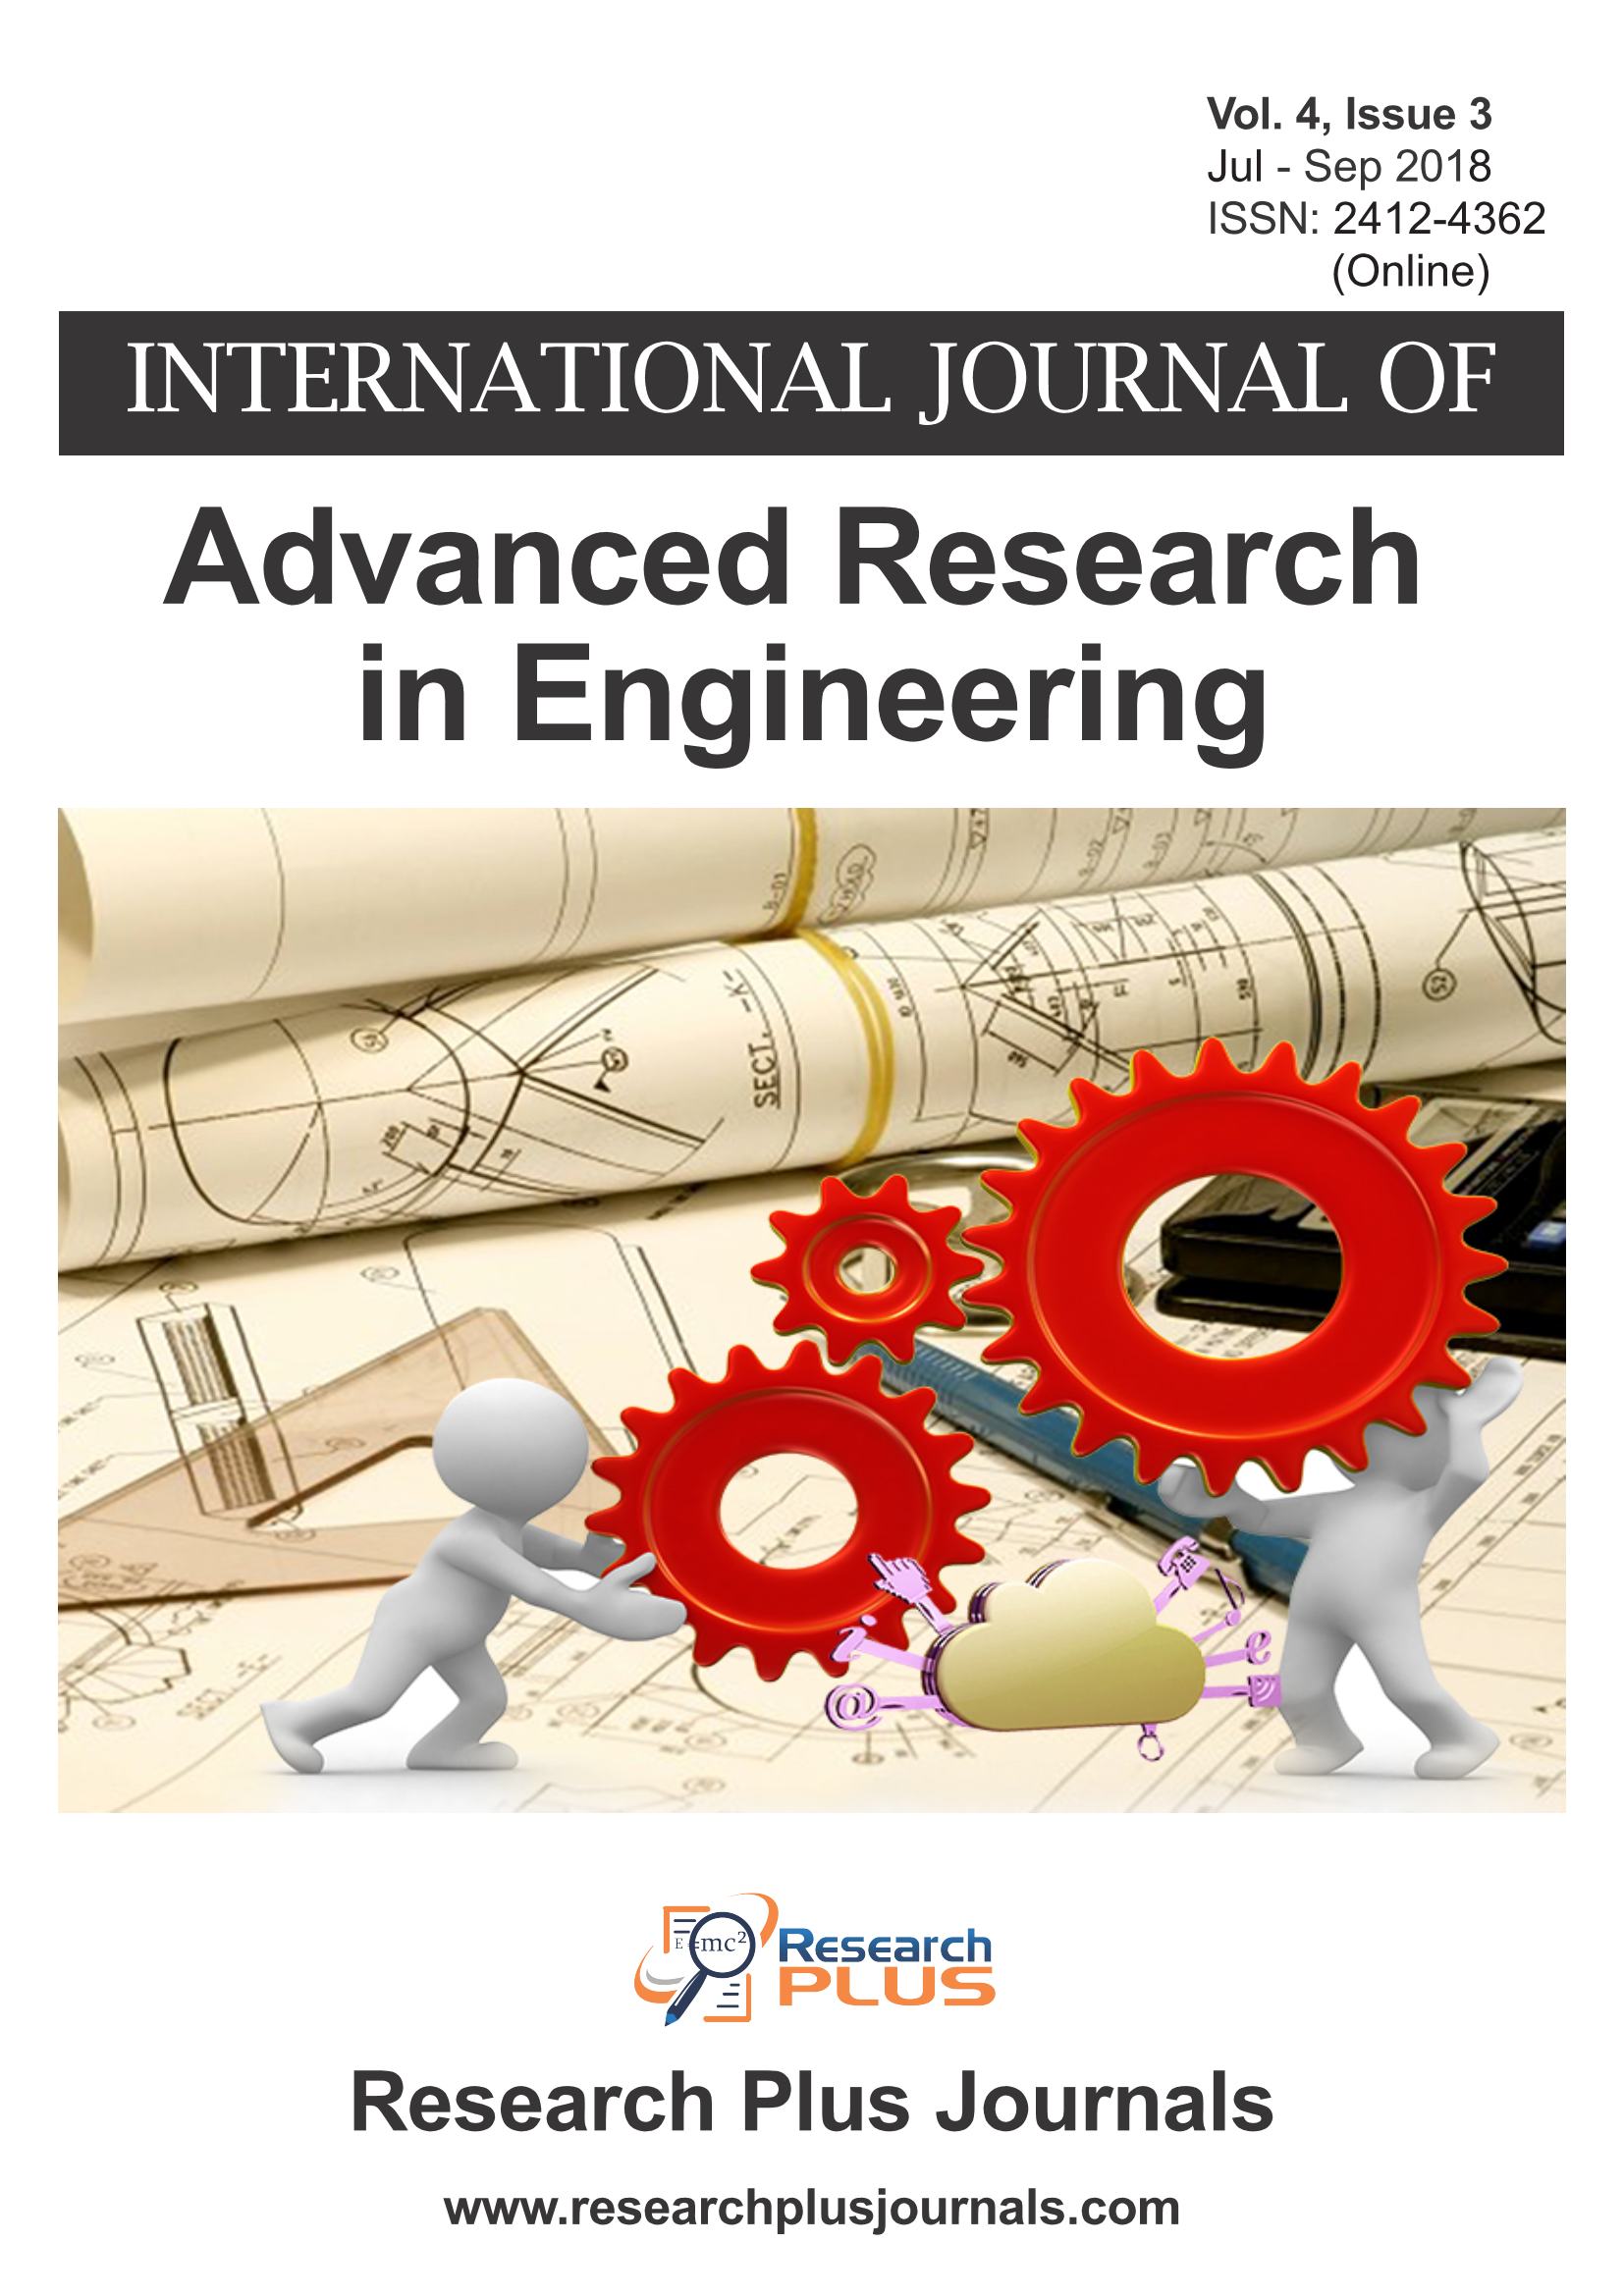 Volume 4, Issue 3, International Journal of Advanced Research in Engineering (IJARE)  (Online ISSN 2412-4362)